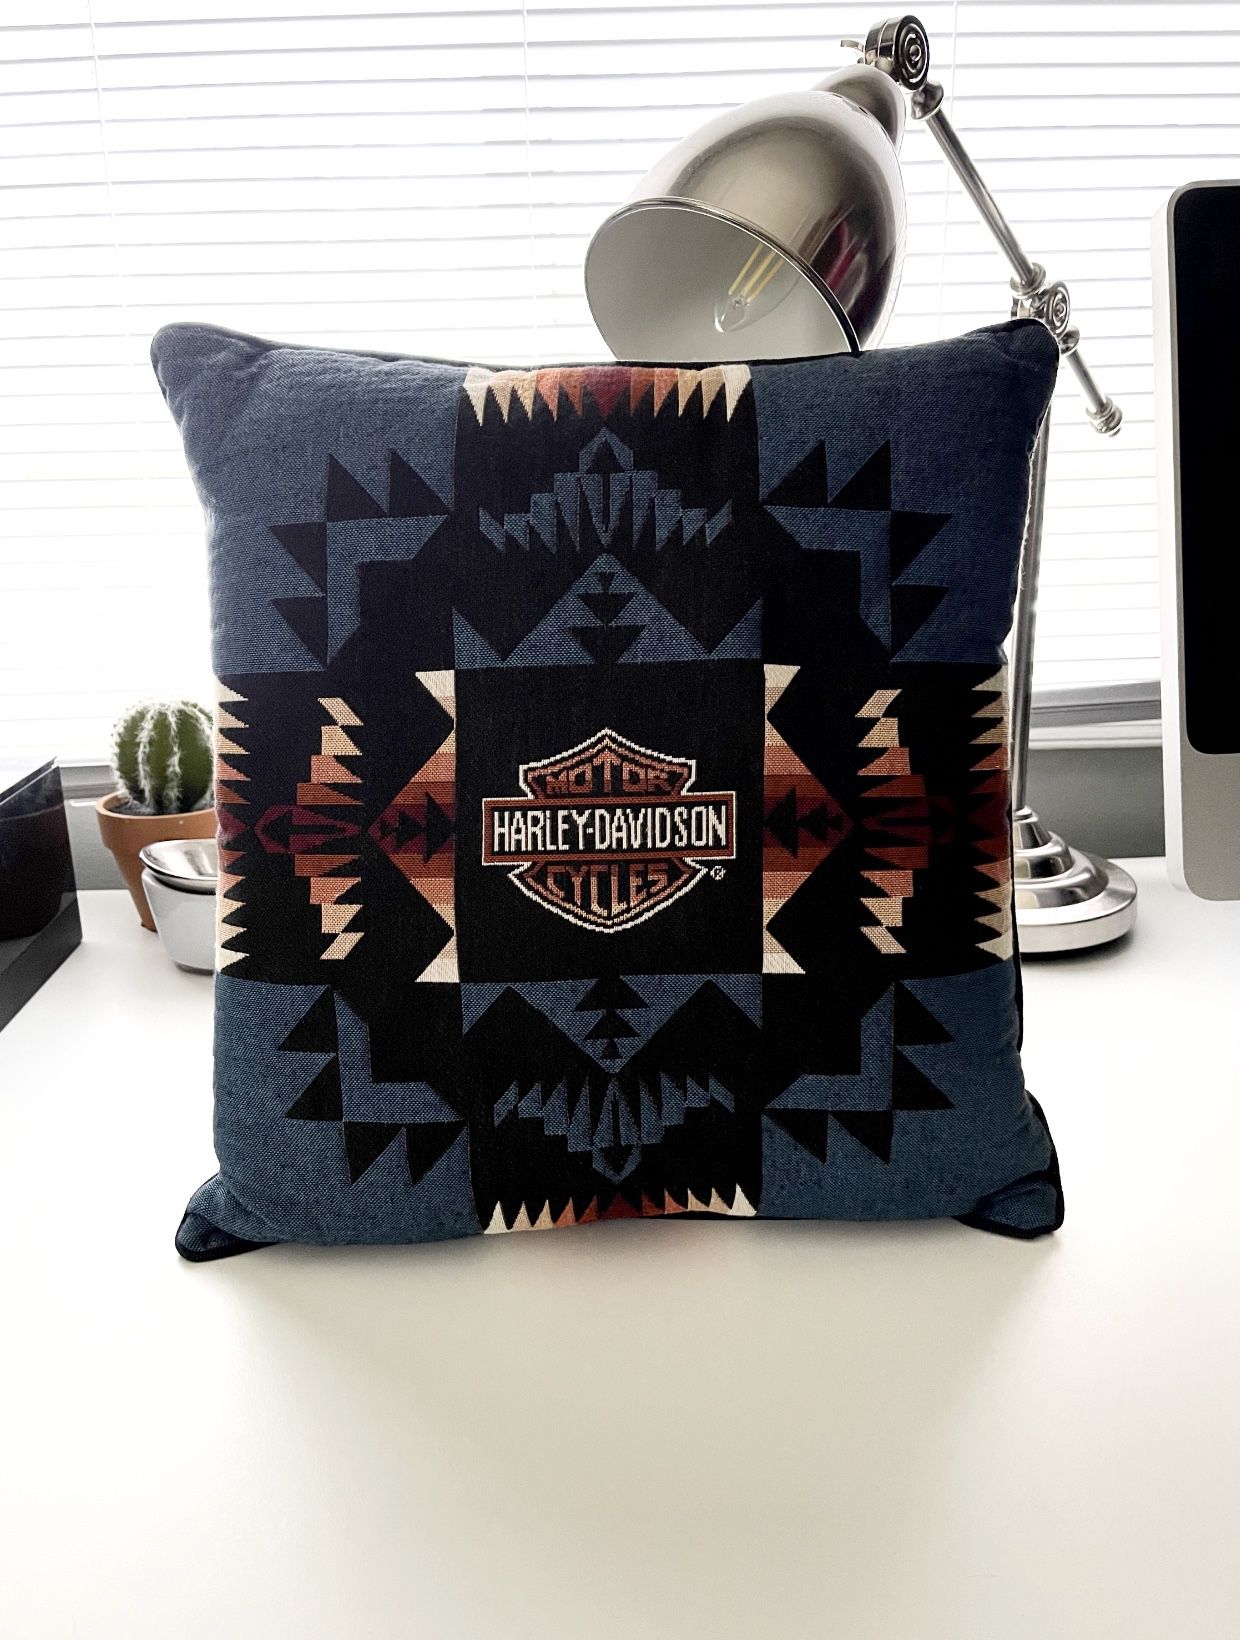 Harley Davidson Tribal print Throw pillow Like new retail $48 Excellent condition. Measurement 15 inches